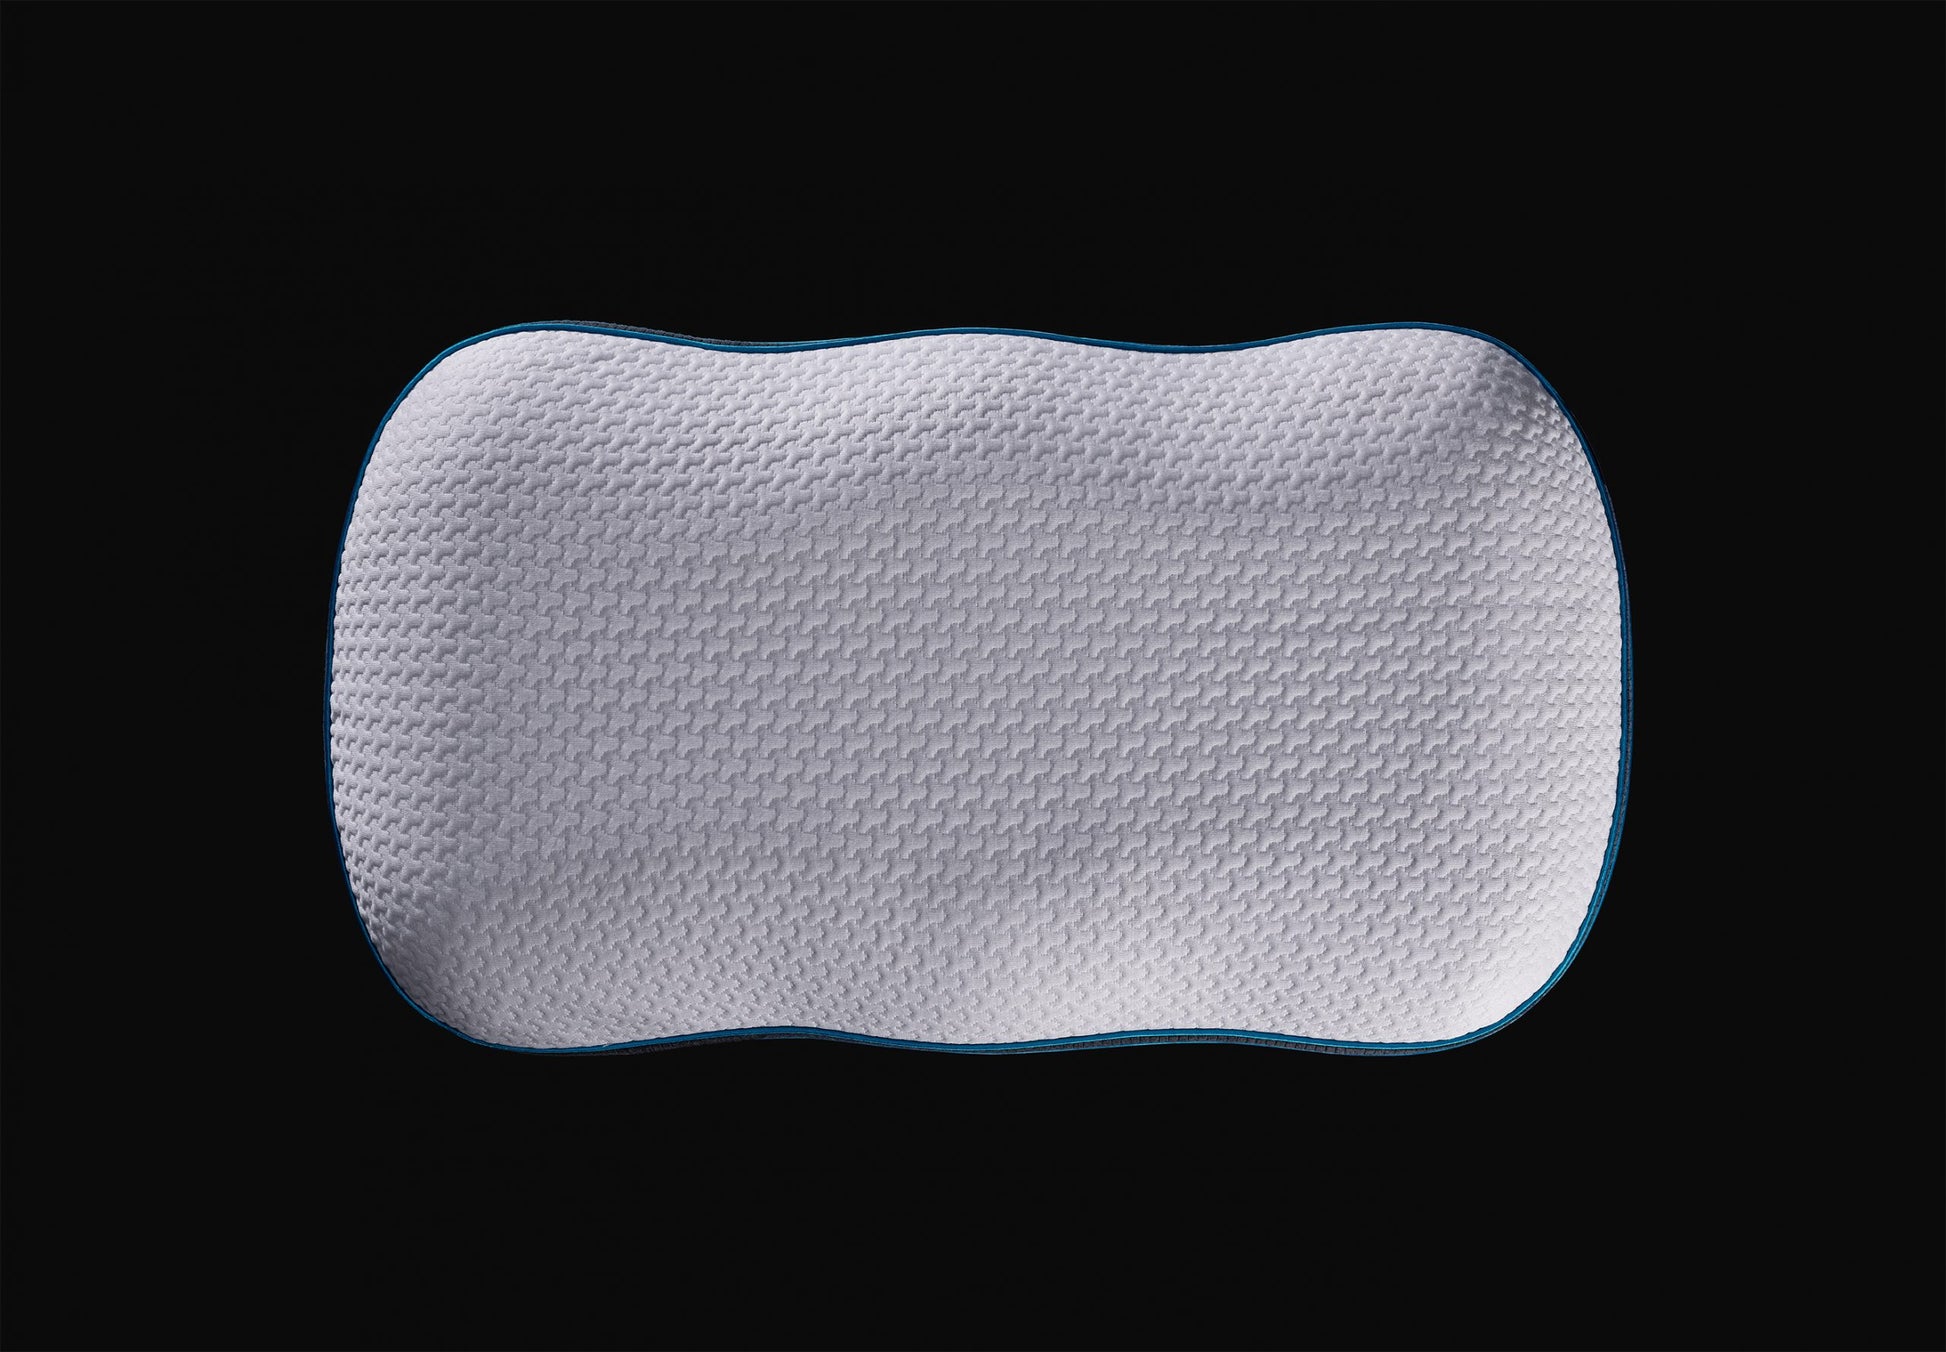 An image of the ErgoPillow, featuring its ergonomic design and plush comfort for optimal neck and head support during sleep.